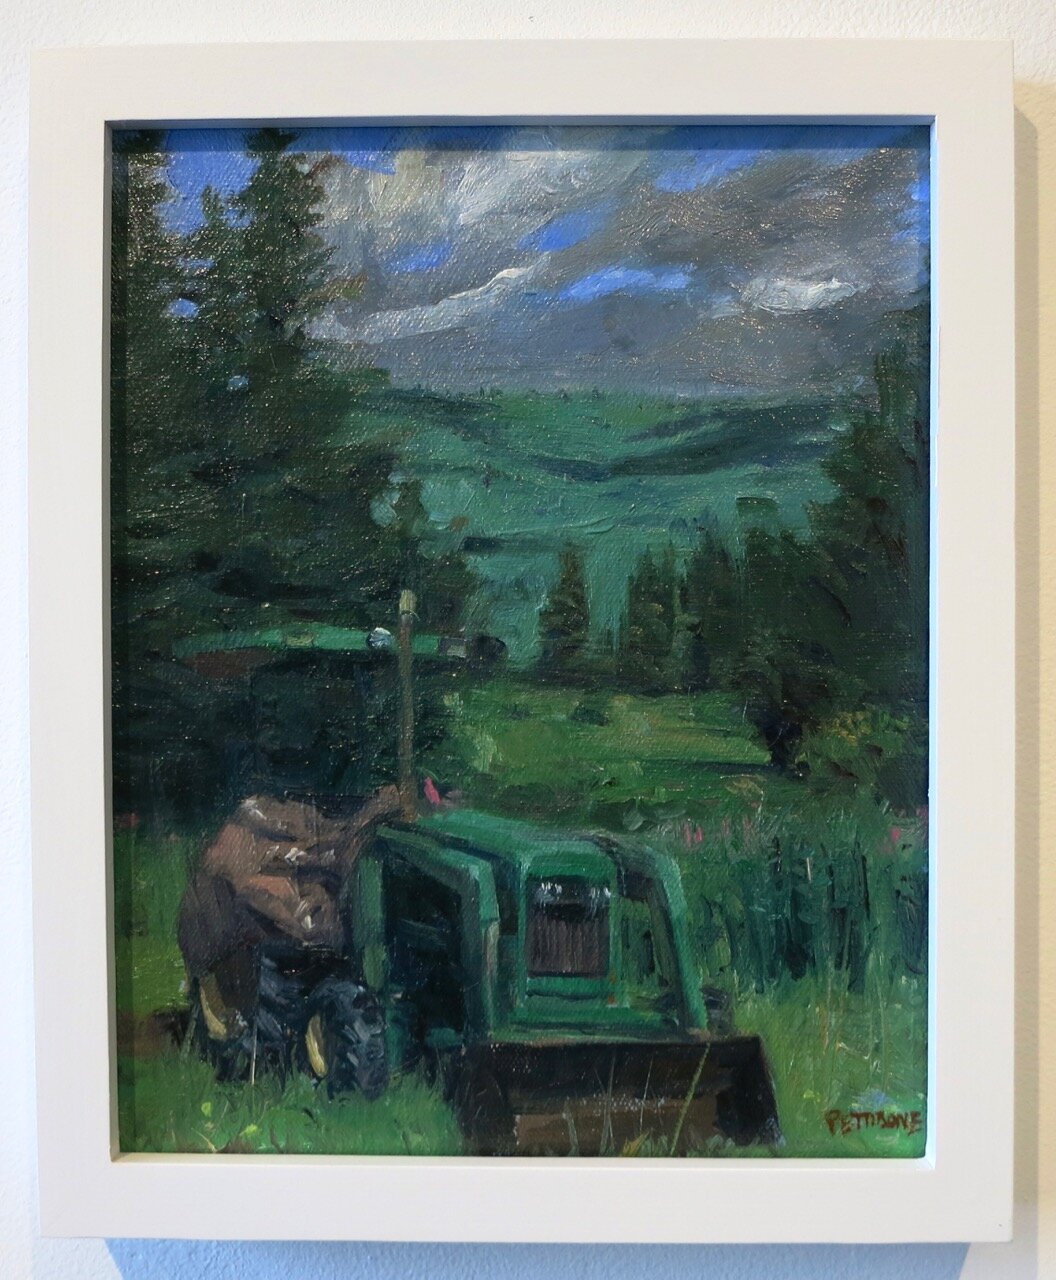    Richard’s Tractor , 2020   Oil on canvas  10x8 inches 